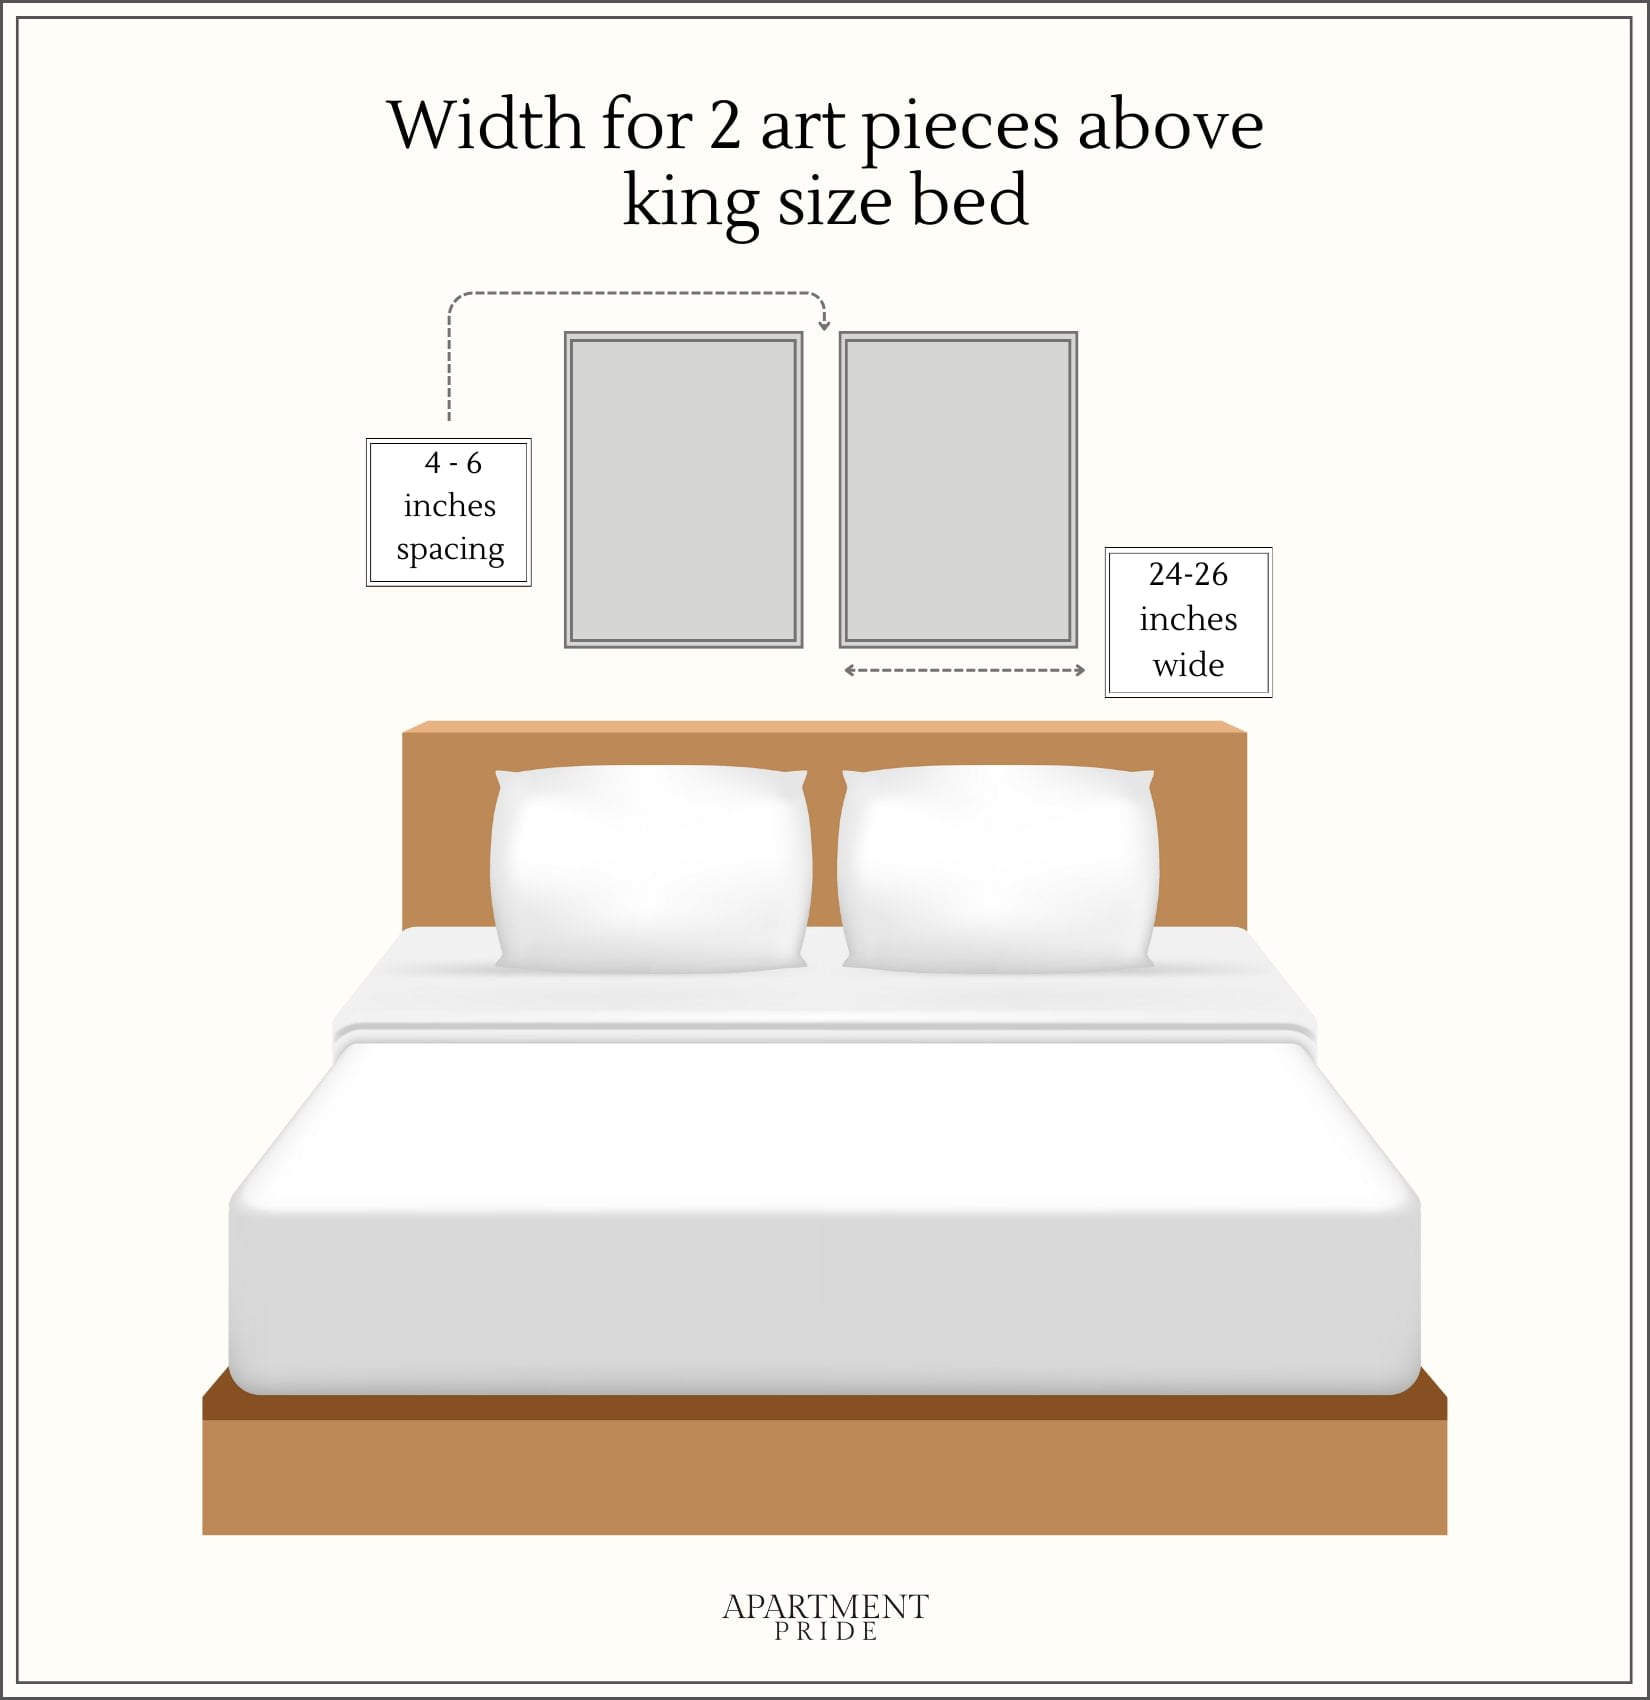 Width measurements for 2 pieces of art above king bed